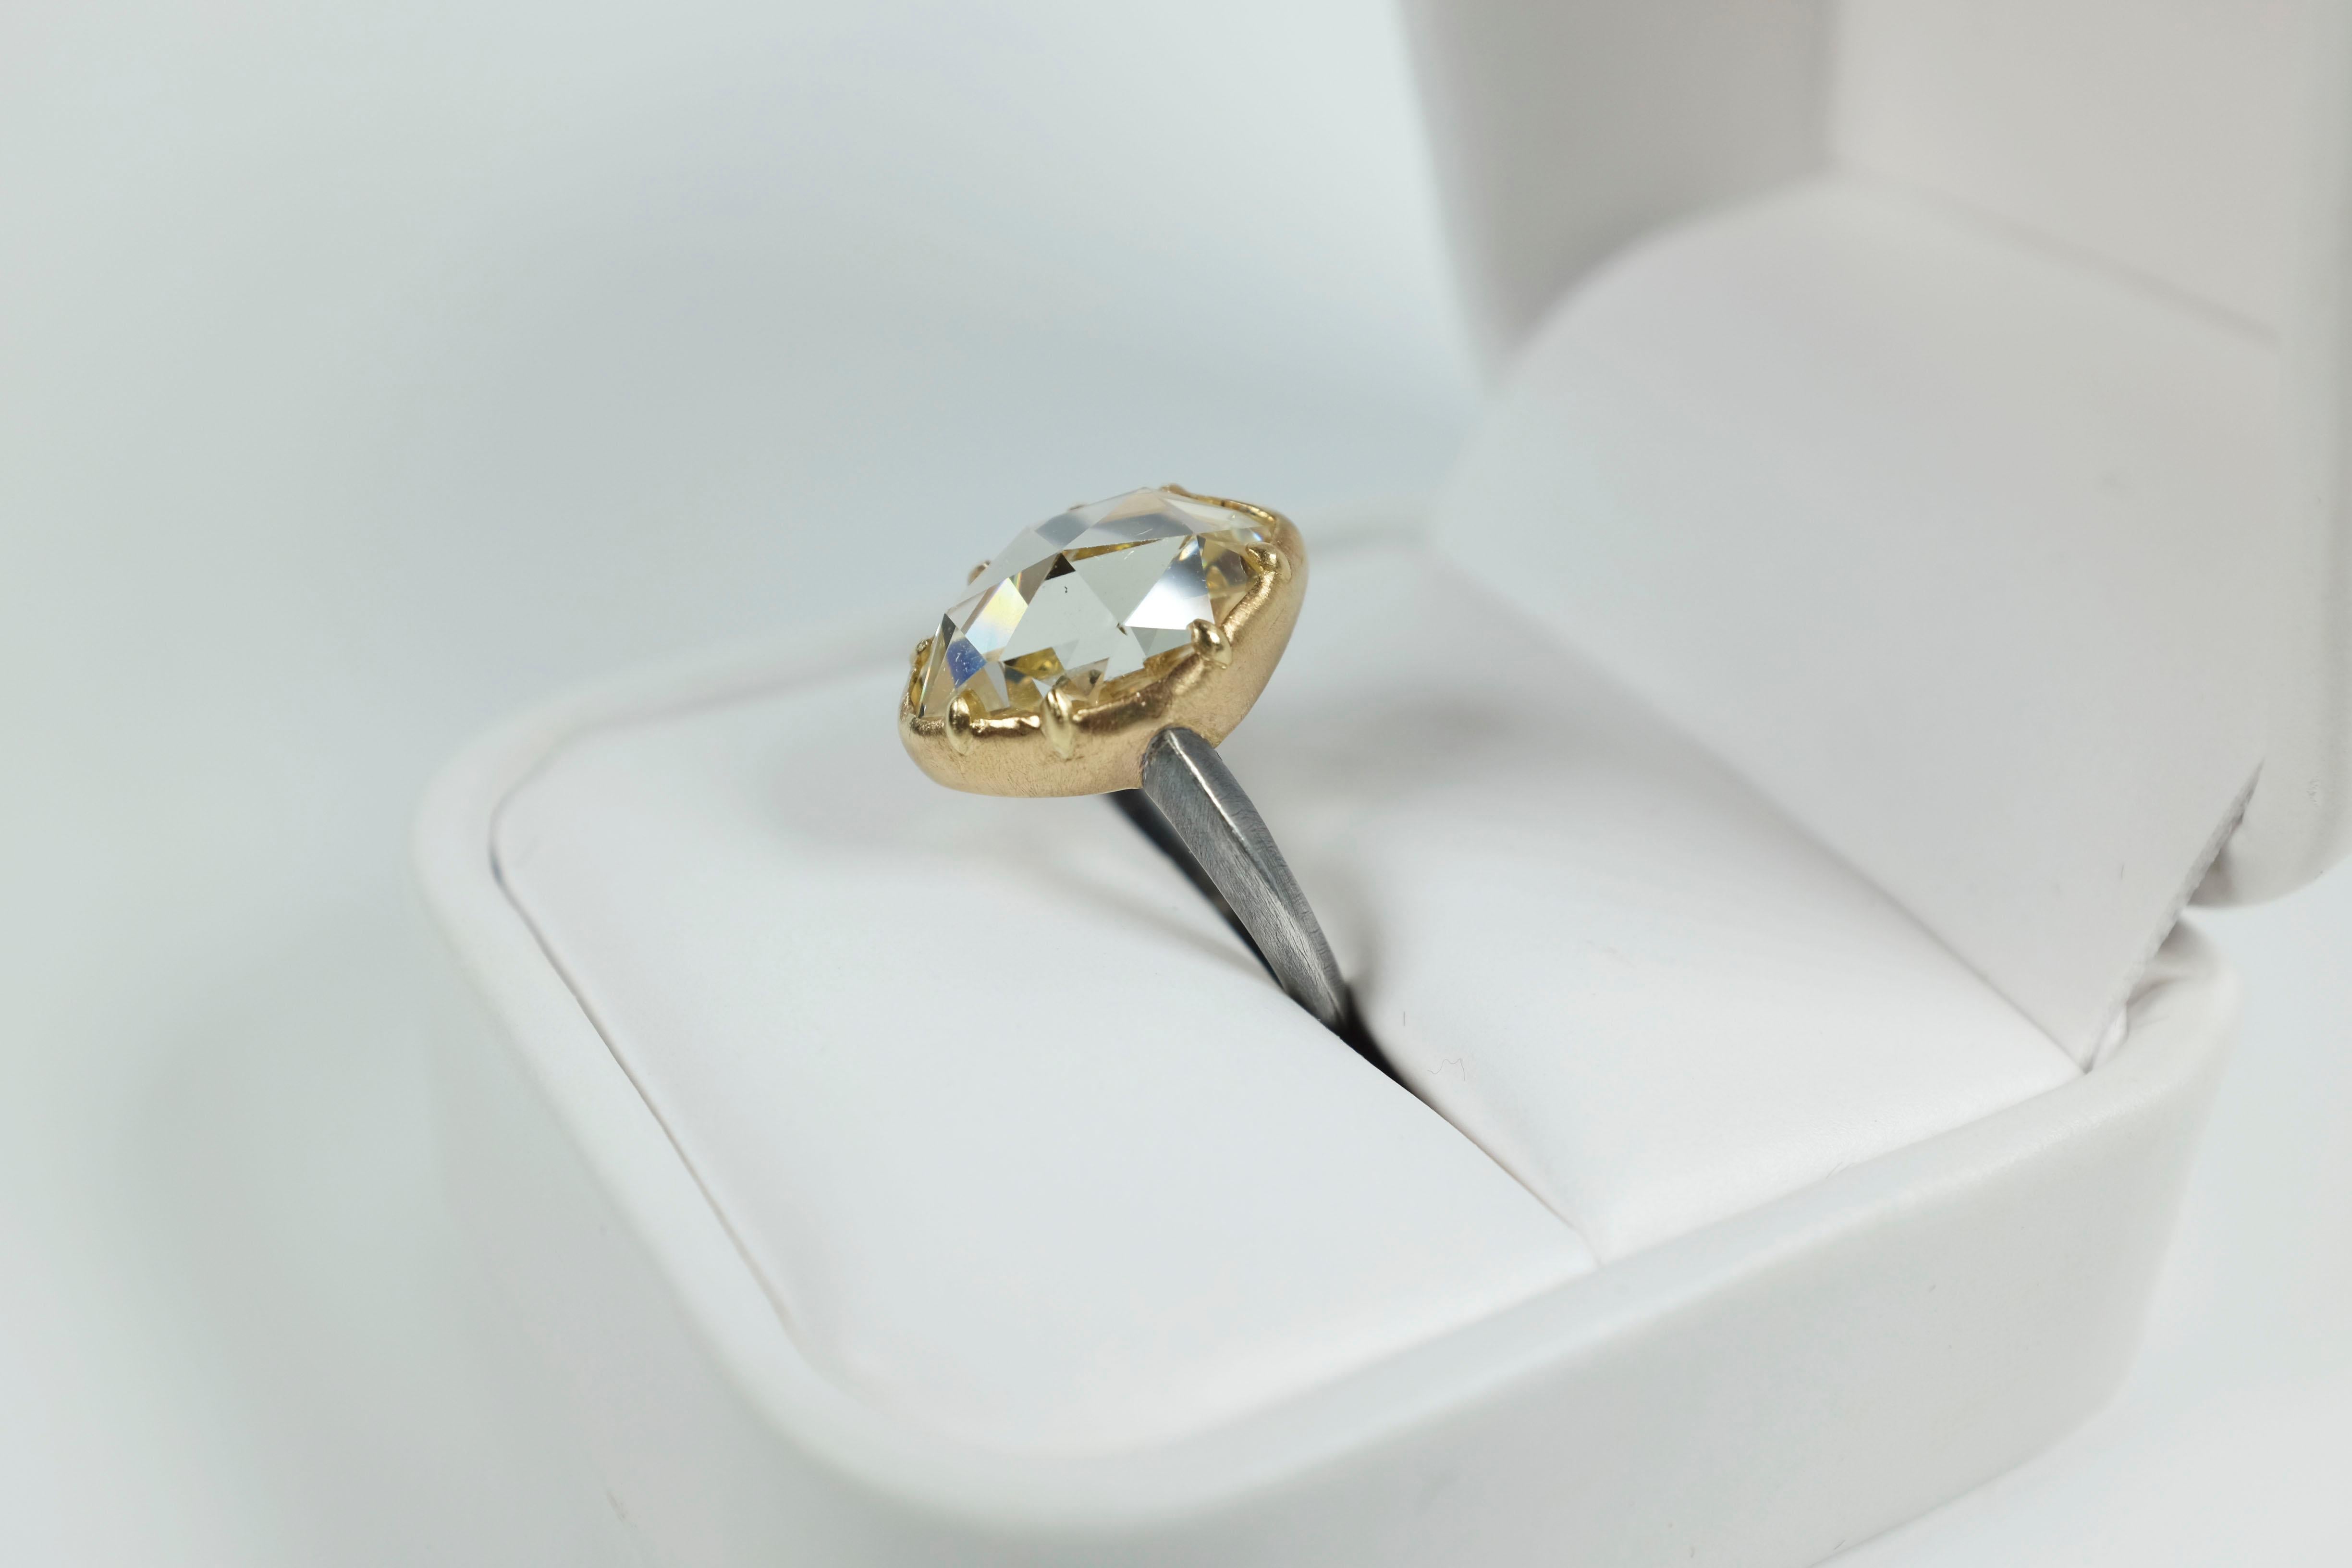 Far too lovely to believe.  This 4.81 carat rose-cut diamond solitaire is  far from the mainstream; it's for rockstars and designers, artists and celebrities.  Unless you've seen this one before, it's unlike anything you've seen, claw set with 18k